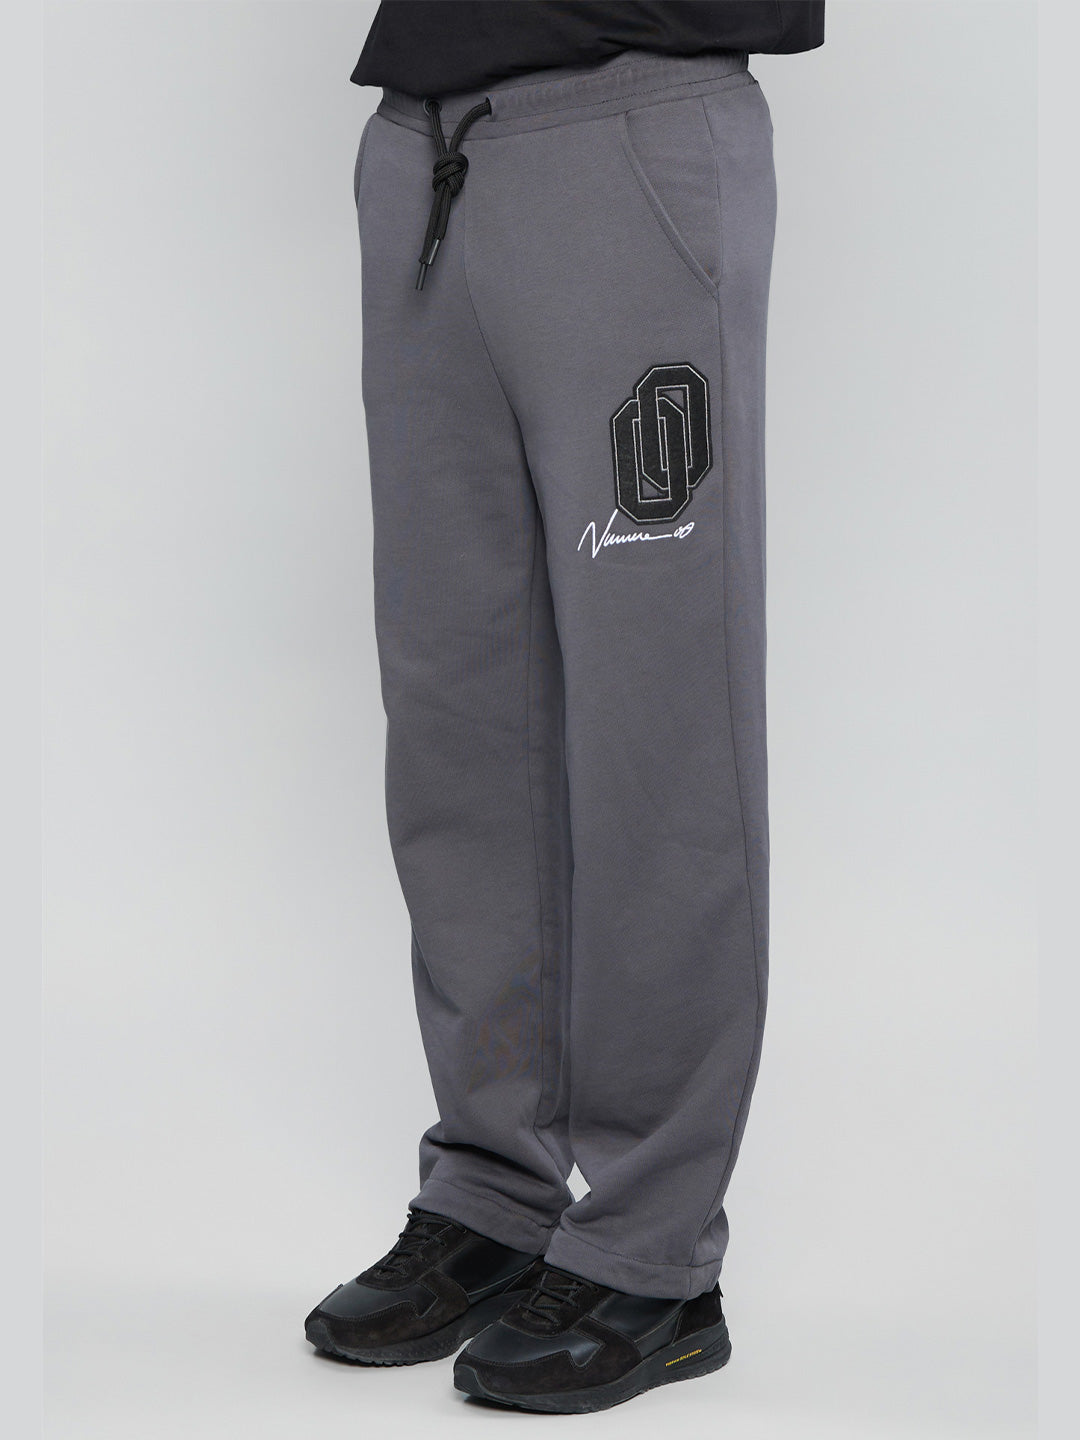 Numero 00 Friendly College Pant gray trousers